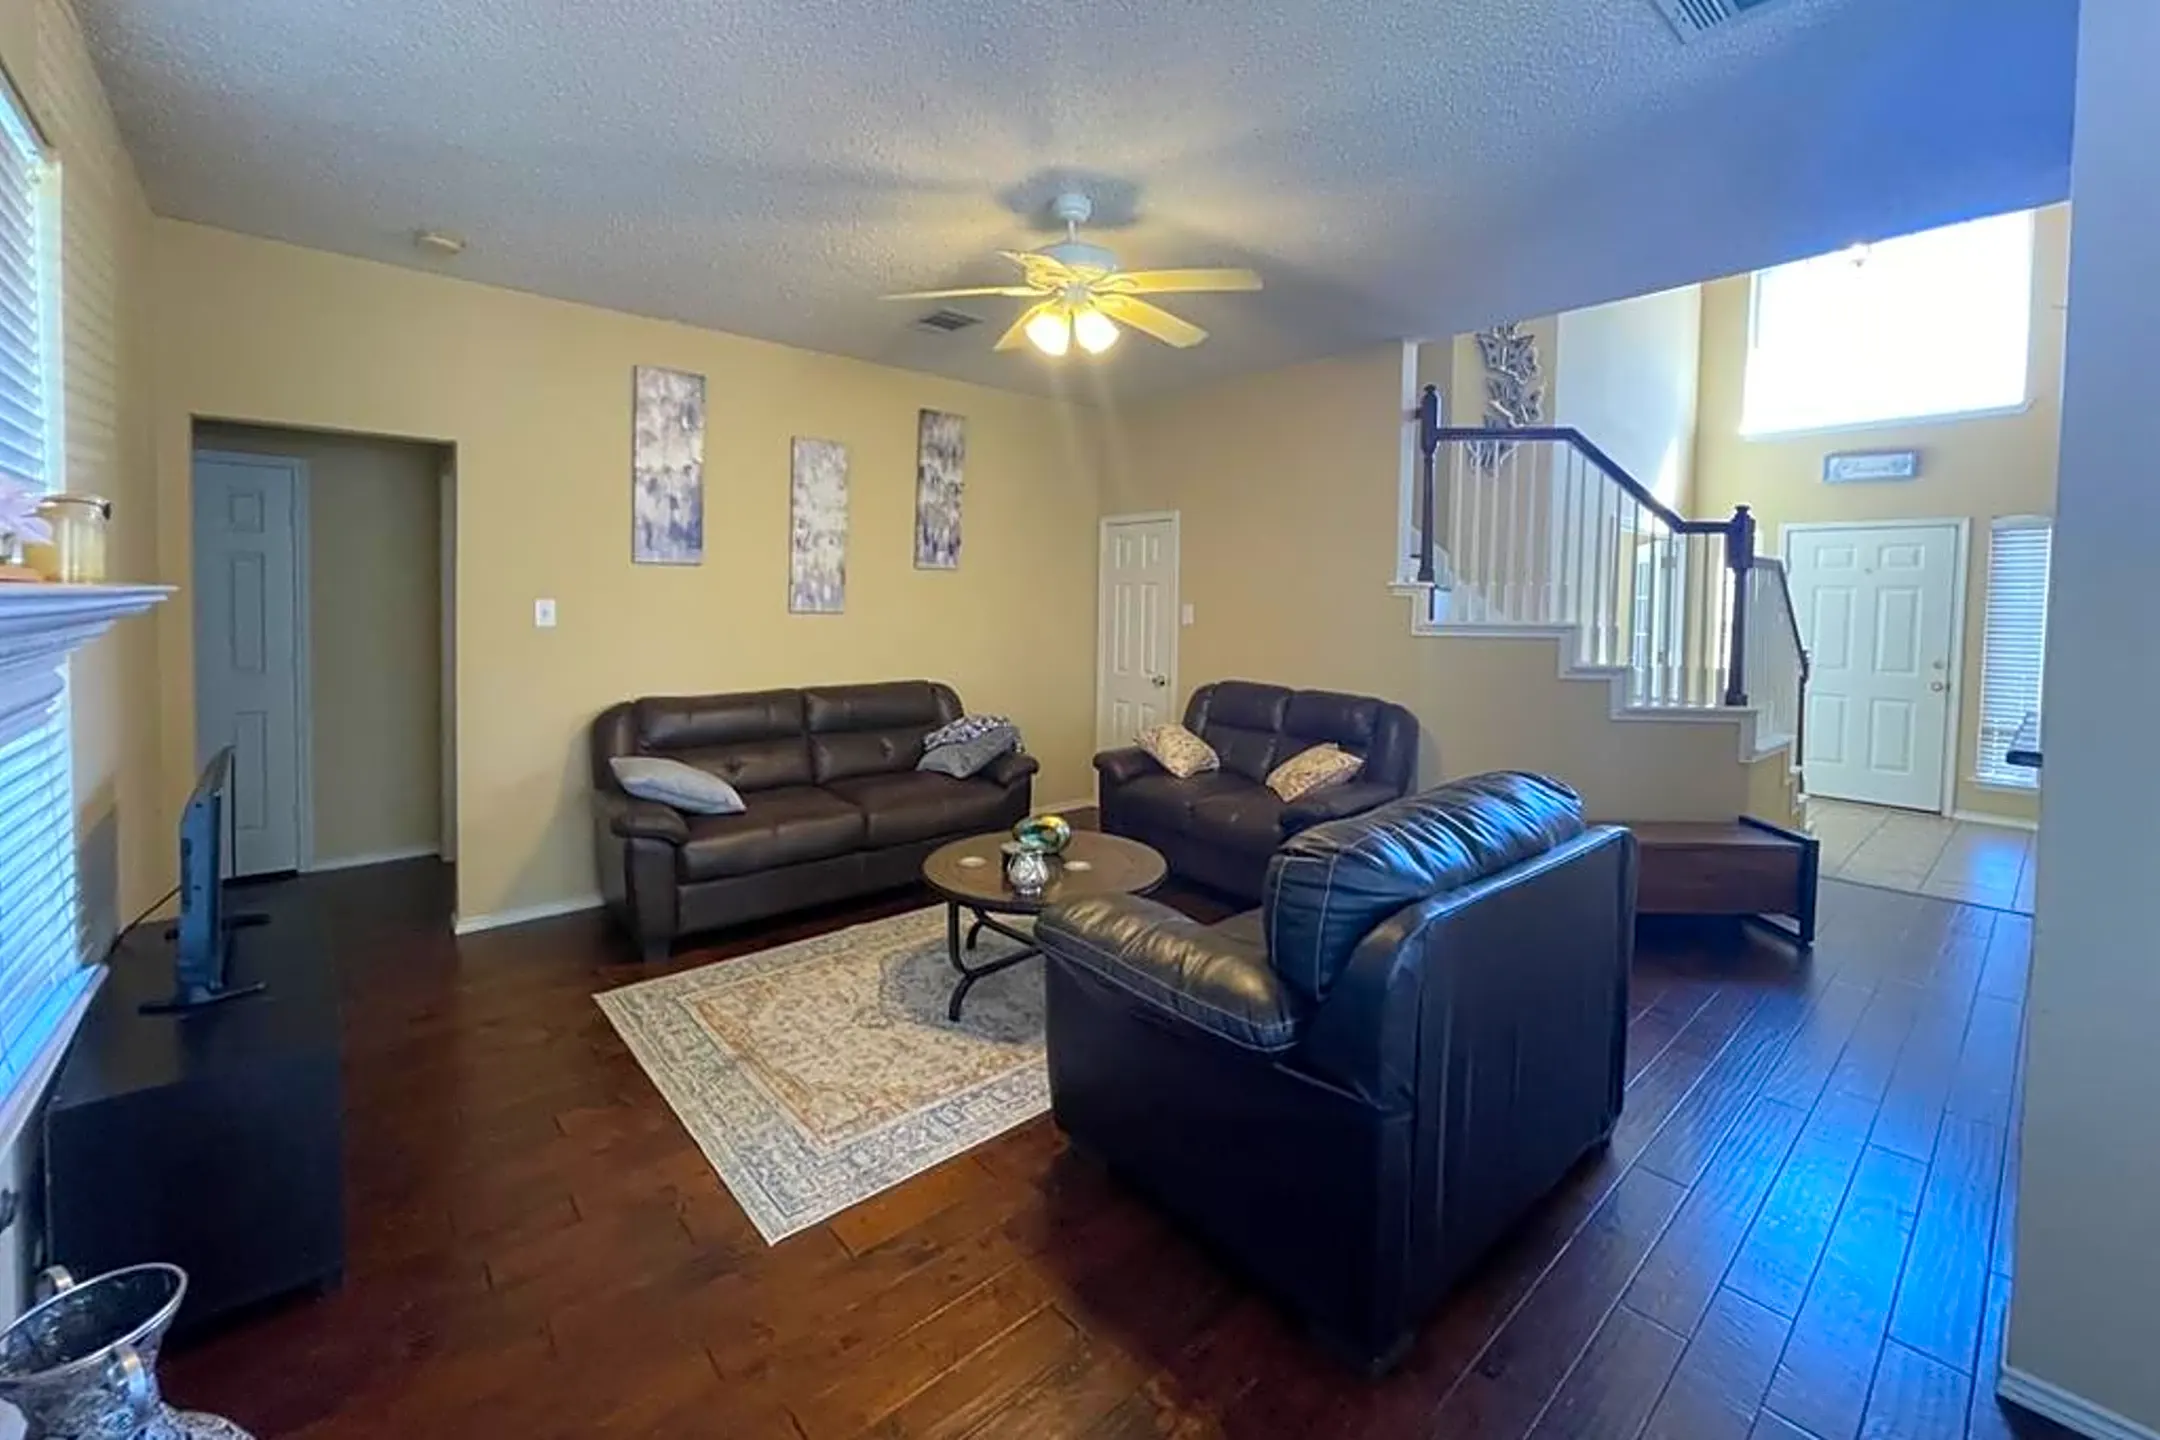 Living Room - 3929 Windford Dr - Plano, TX